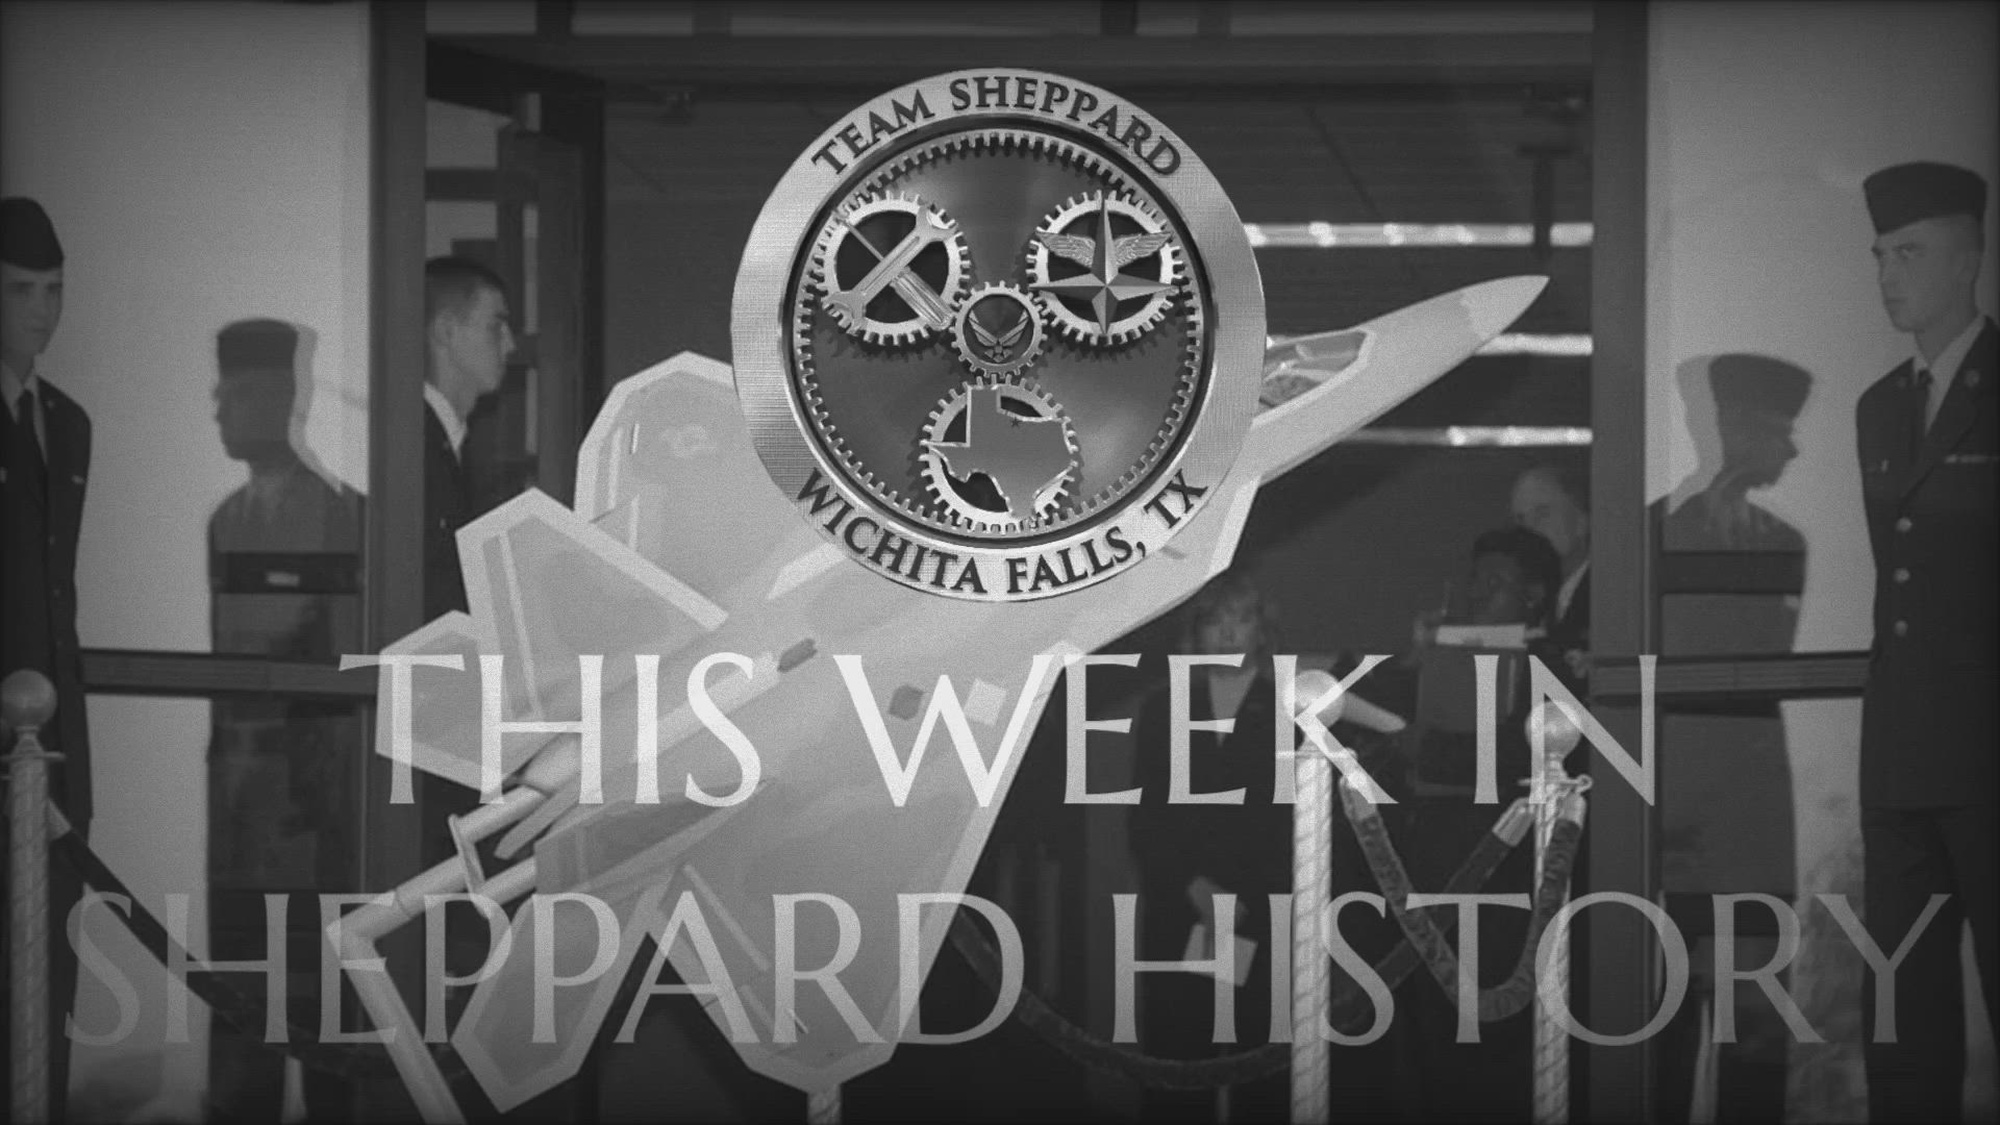 This Week in Sheppard History 01-24-22